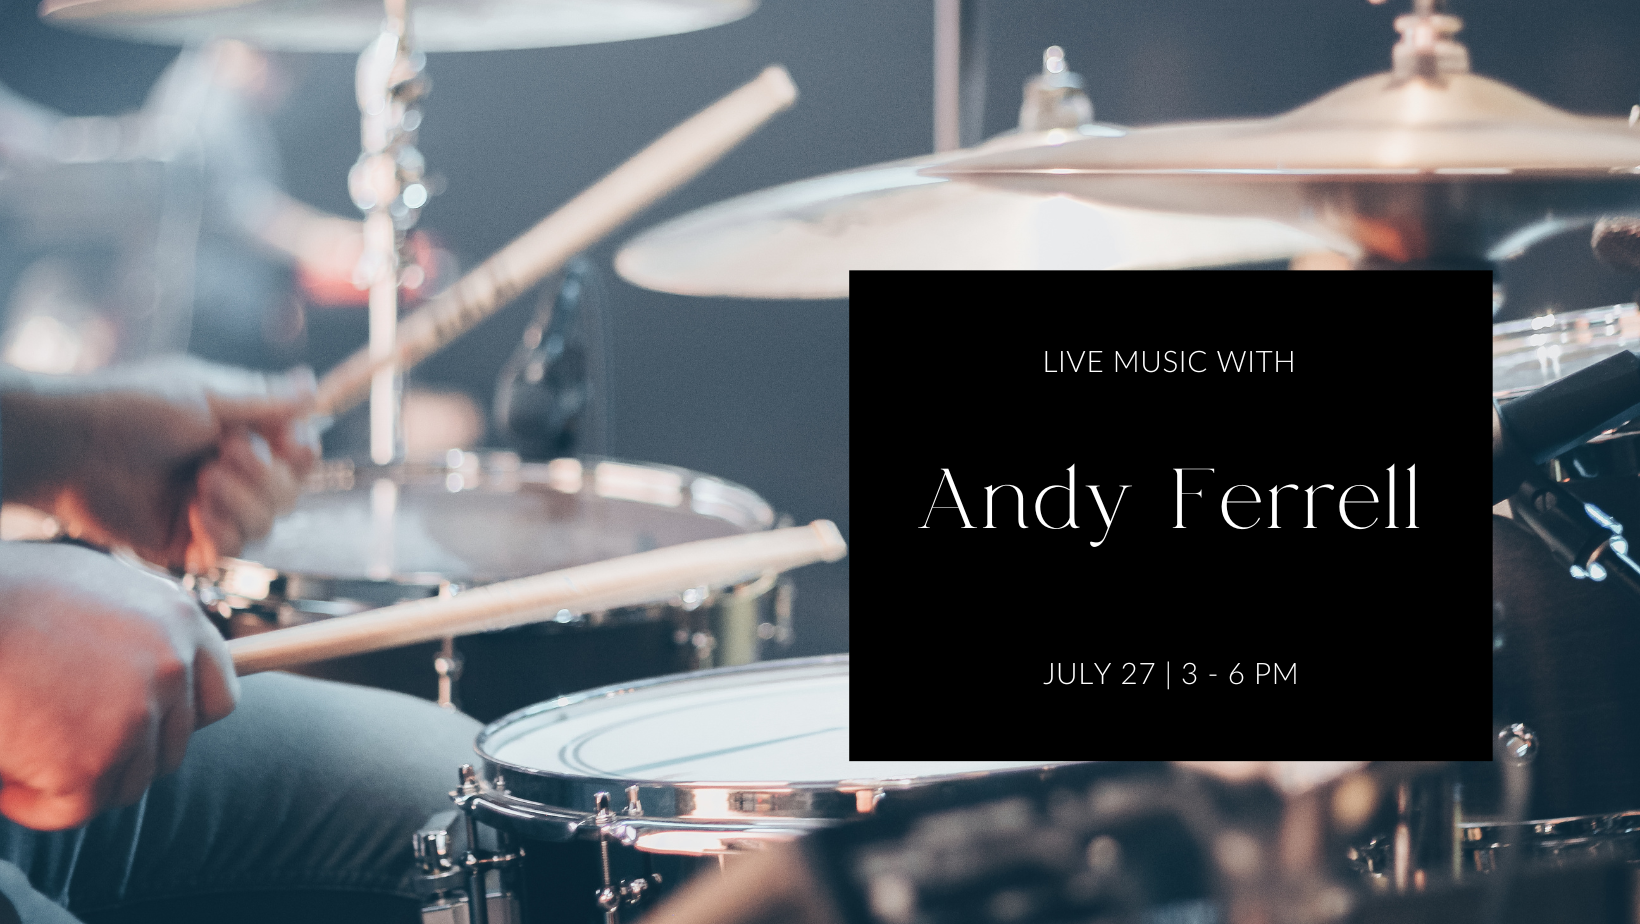 Live Music: Andy Ferrell